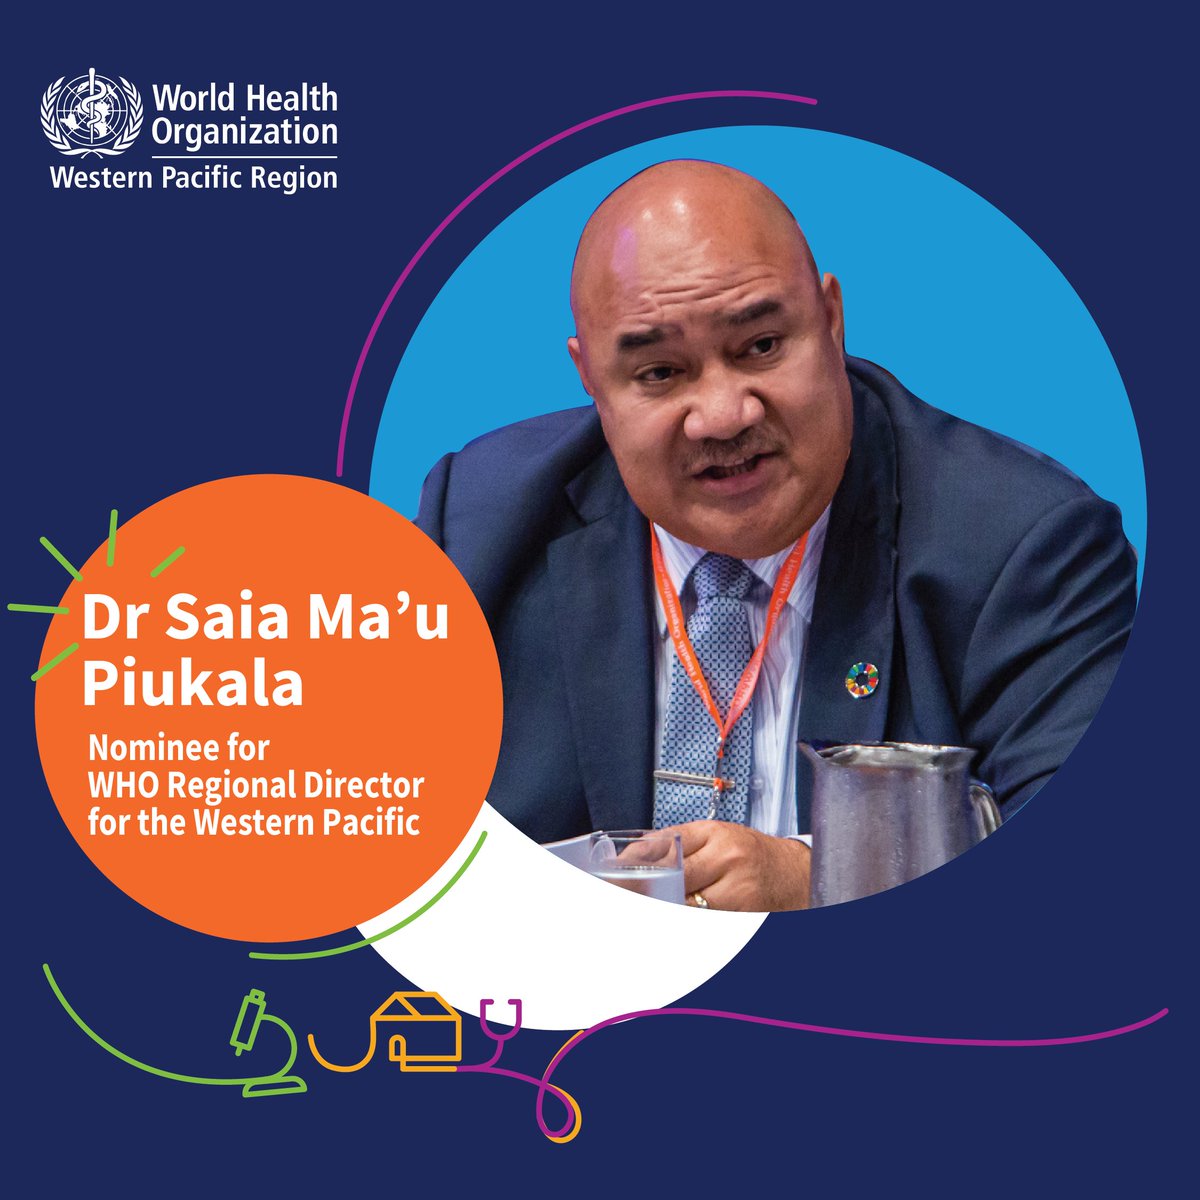 Dr Saia Ma’u Piukala, proposed by Tonga, has been nominated as the next @WHO Regional Director for the Western Pacific. Member States voted to nominate Dr Piukala during the 74th session of the WHO Regional Committee for the Western Pacific #RCM74.